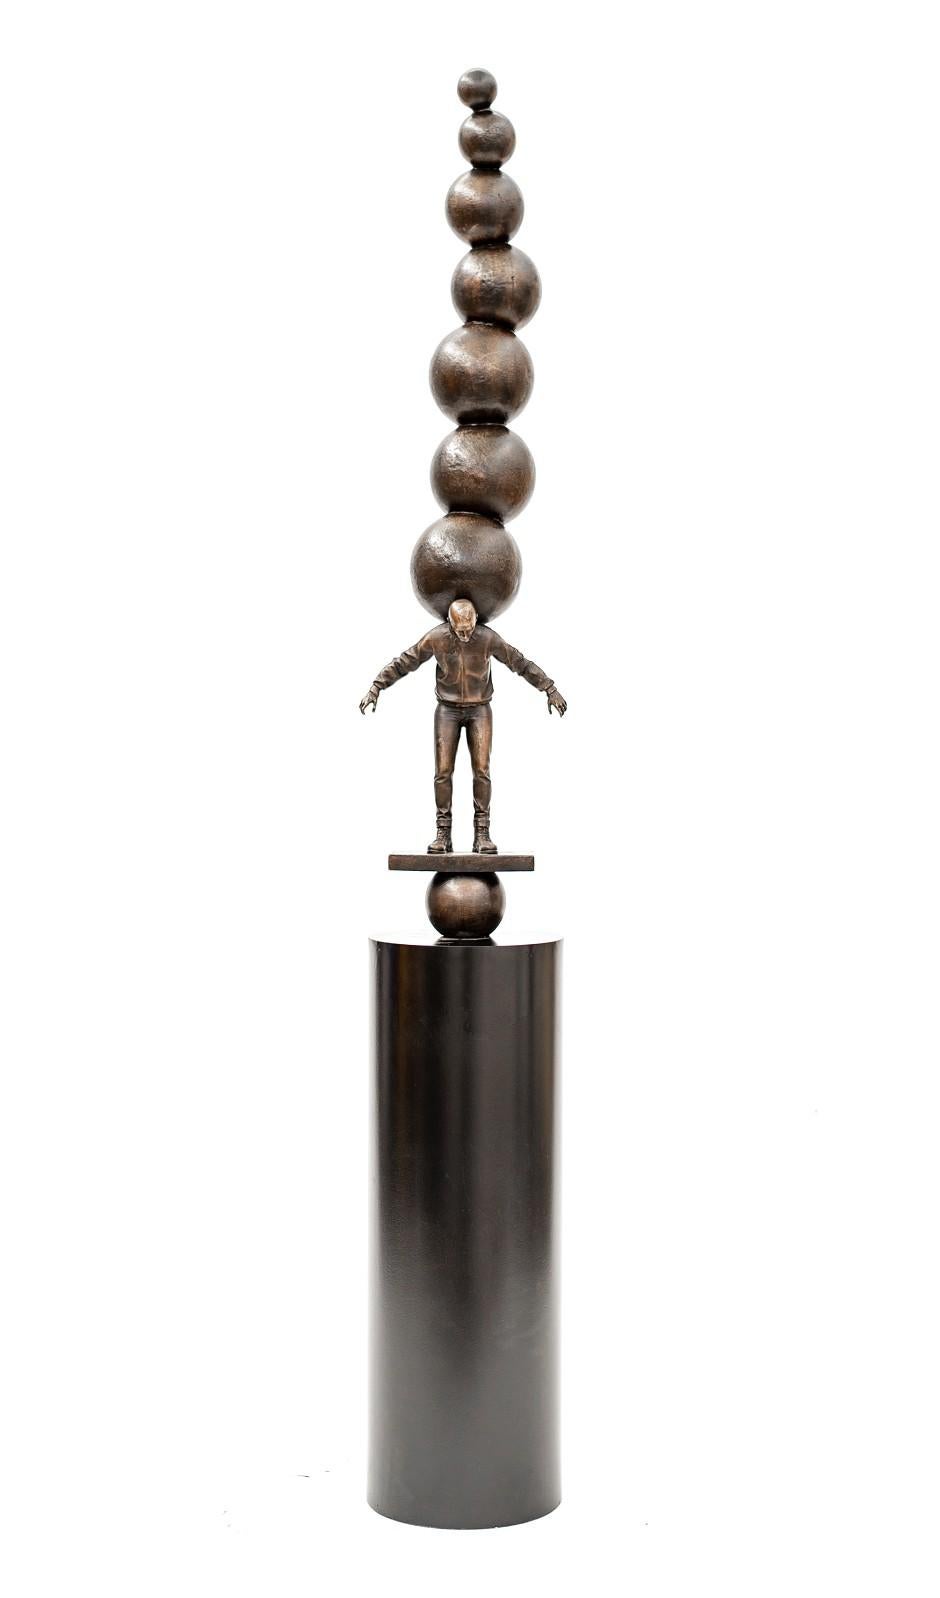 Semblance of Balance - Bronze casted male figure with stacked spheres - Sculpture by Roch Smith